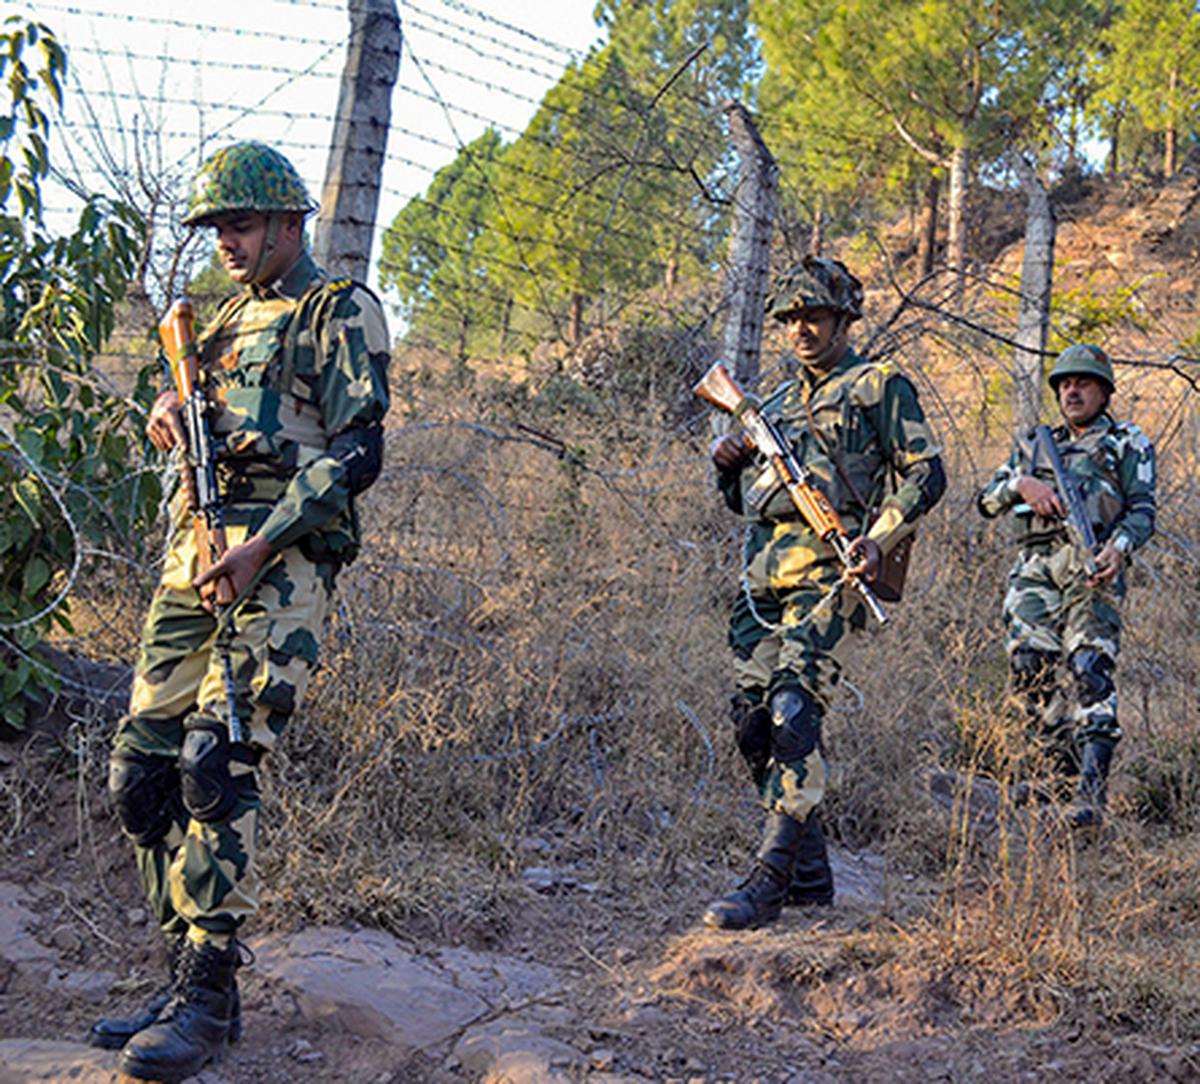 Infiltrator killed in Poonch, operation continues: Army